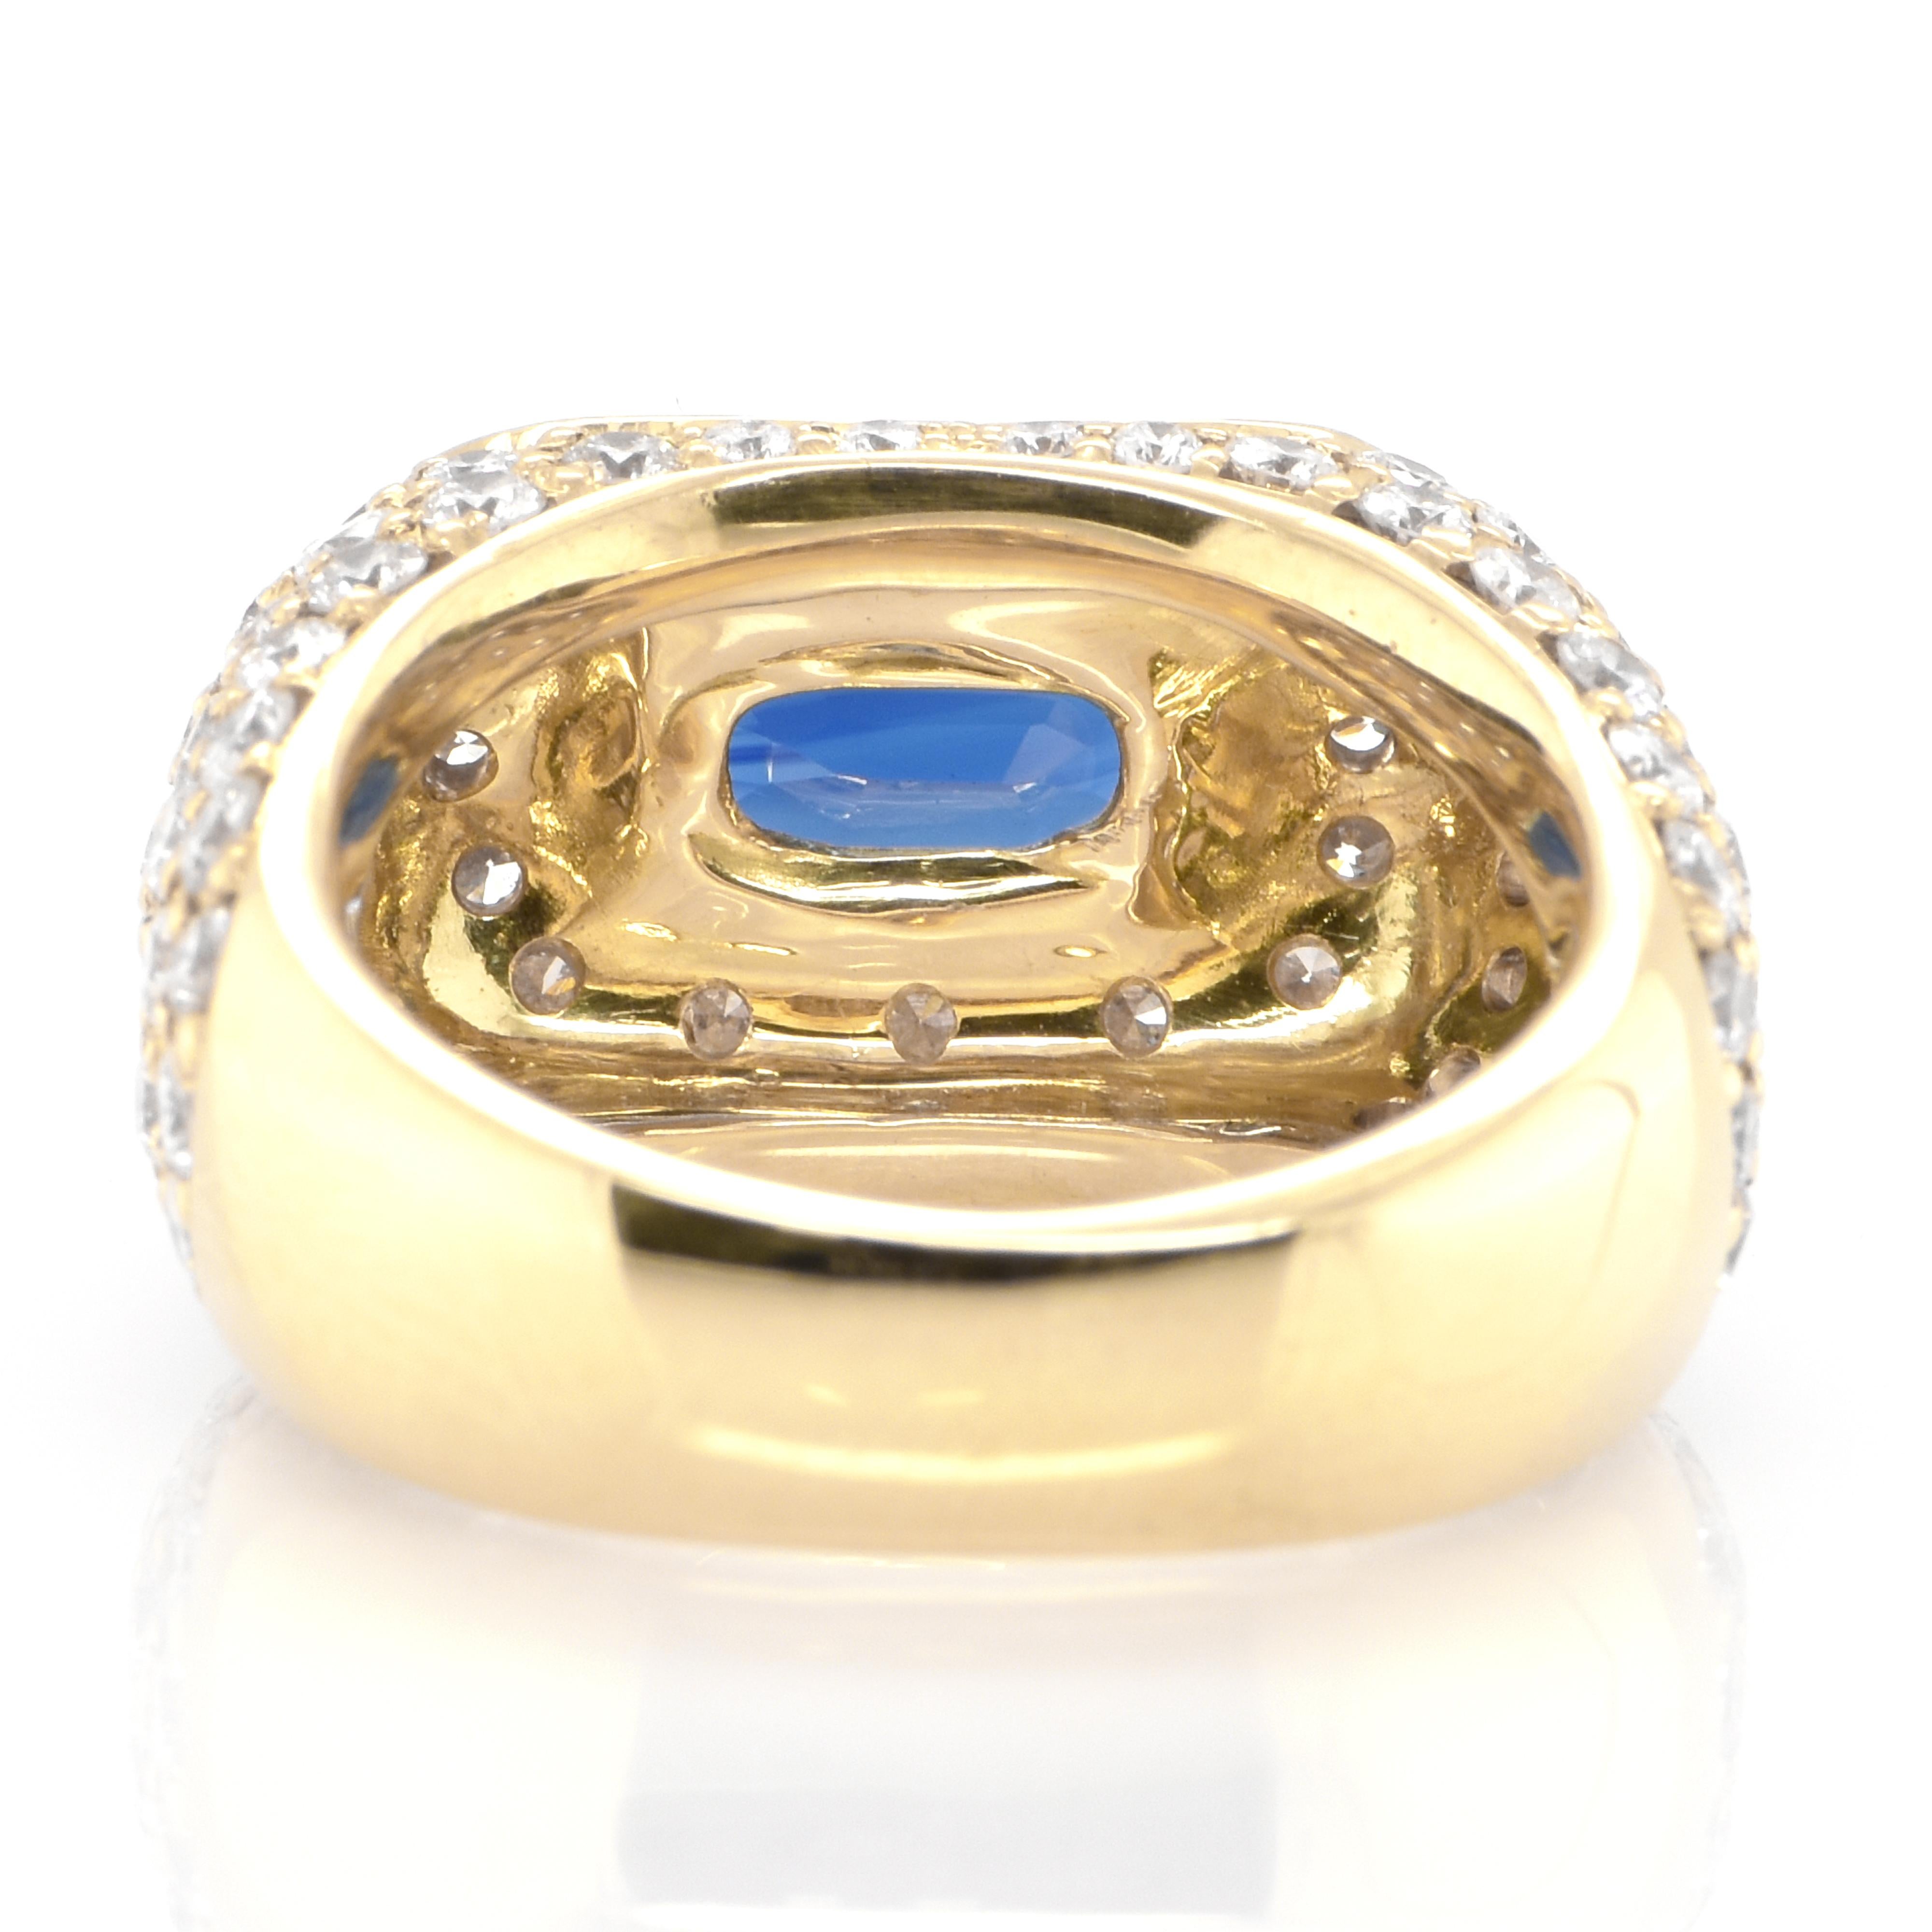 Women's 3.47 Carat Natural Sapphire and Diamond Cocktail Ring Set in 18K Yellow Gold For Sale